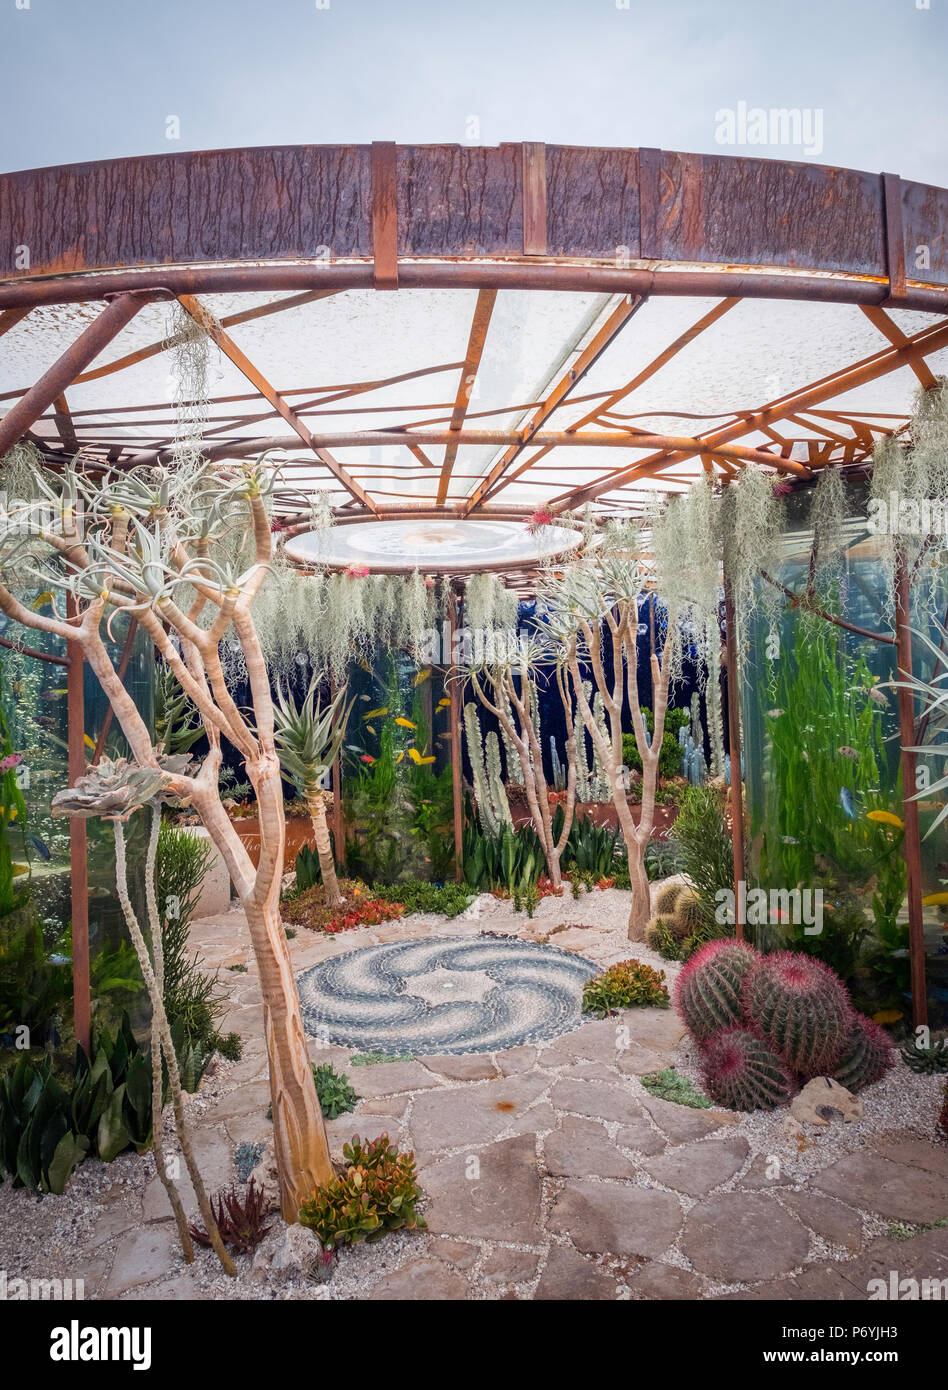 The Pearlfisher garden, at the Chelsea Flower Show 2018, London, UK. Stock Photo